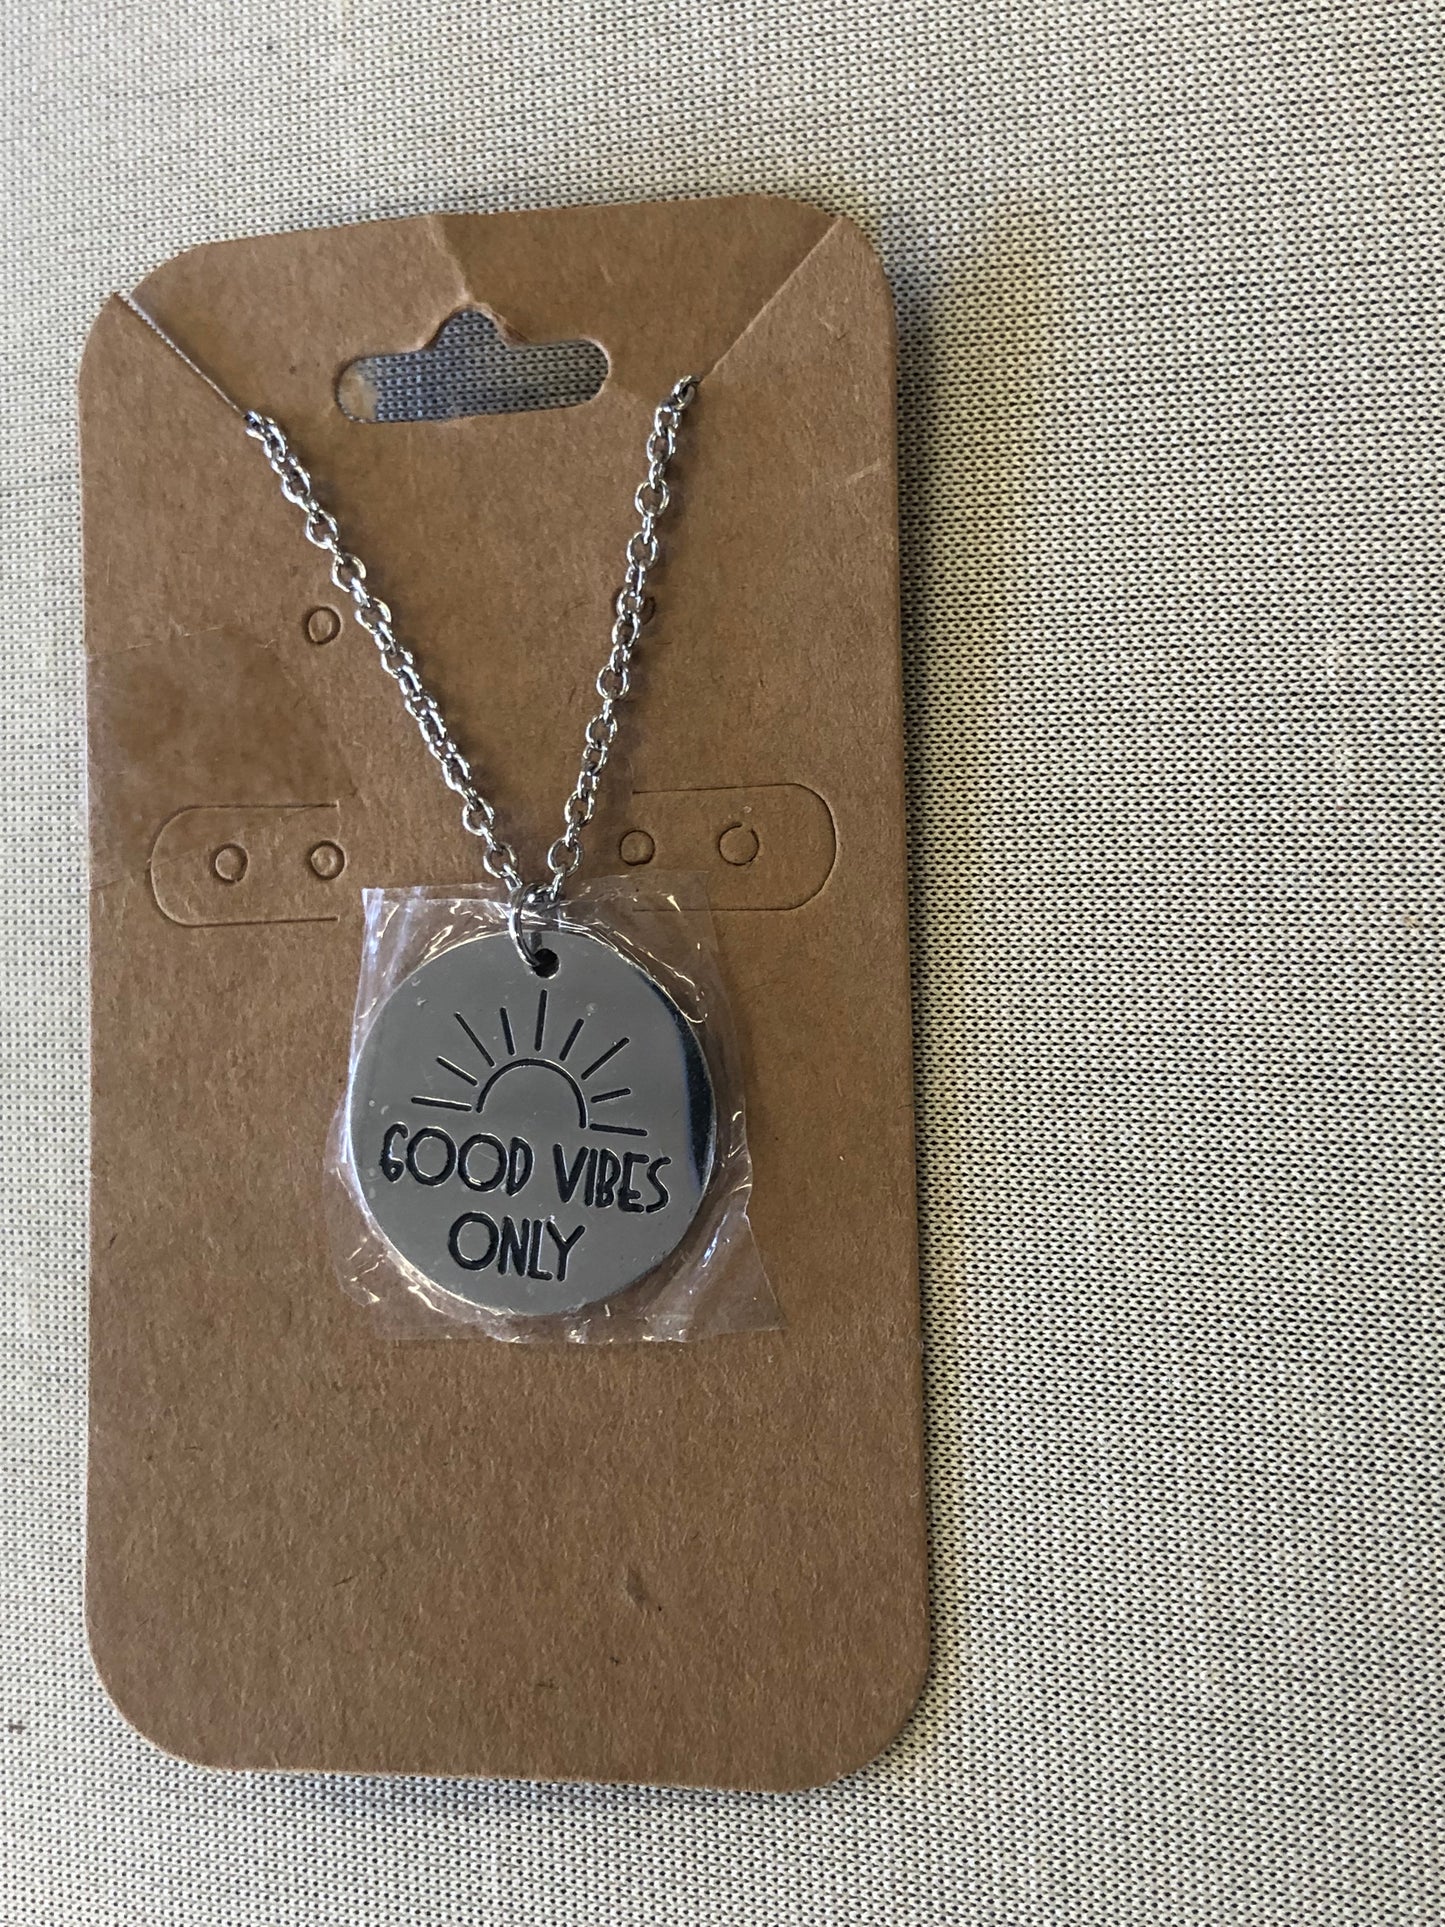 Good Vibes Only Necklace